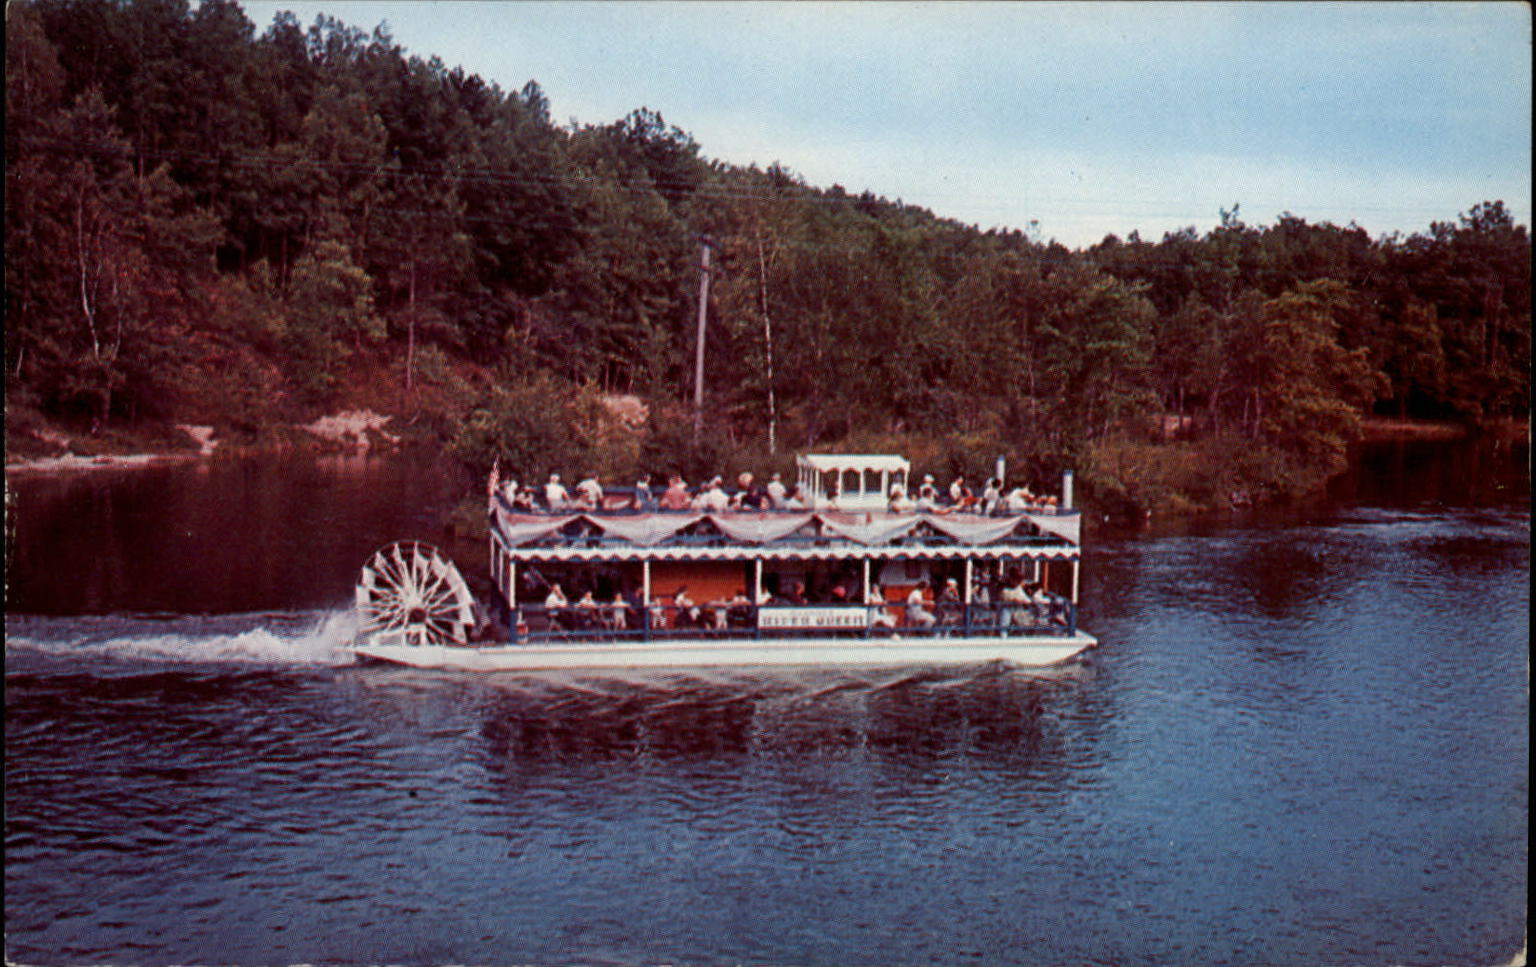 River Queen paddlewheel boat Au Sable River Huron National Forest Michigan 1960s